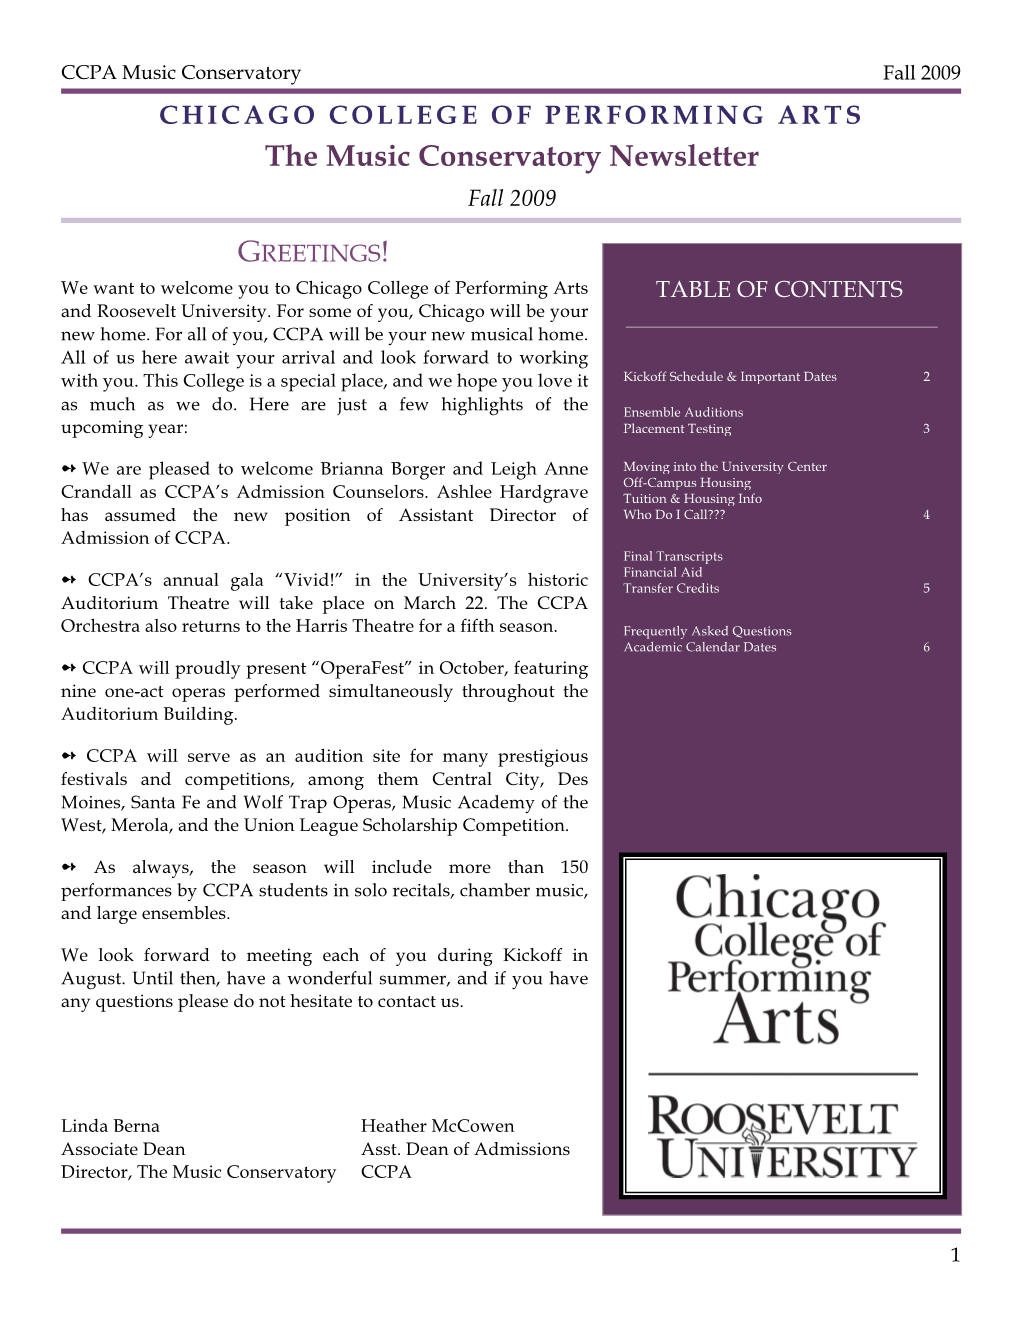 The Music Conservatory Newsletter Fall 2009